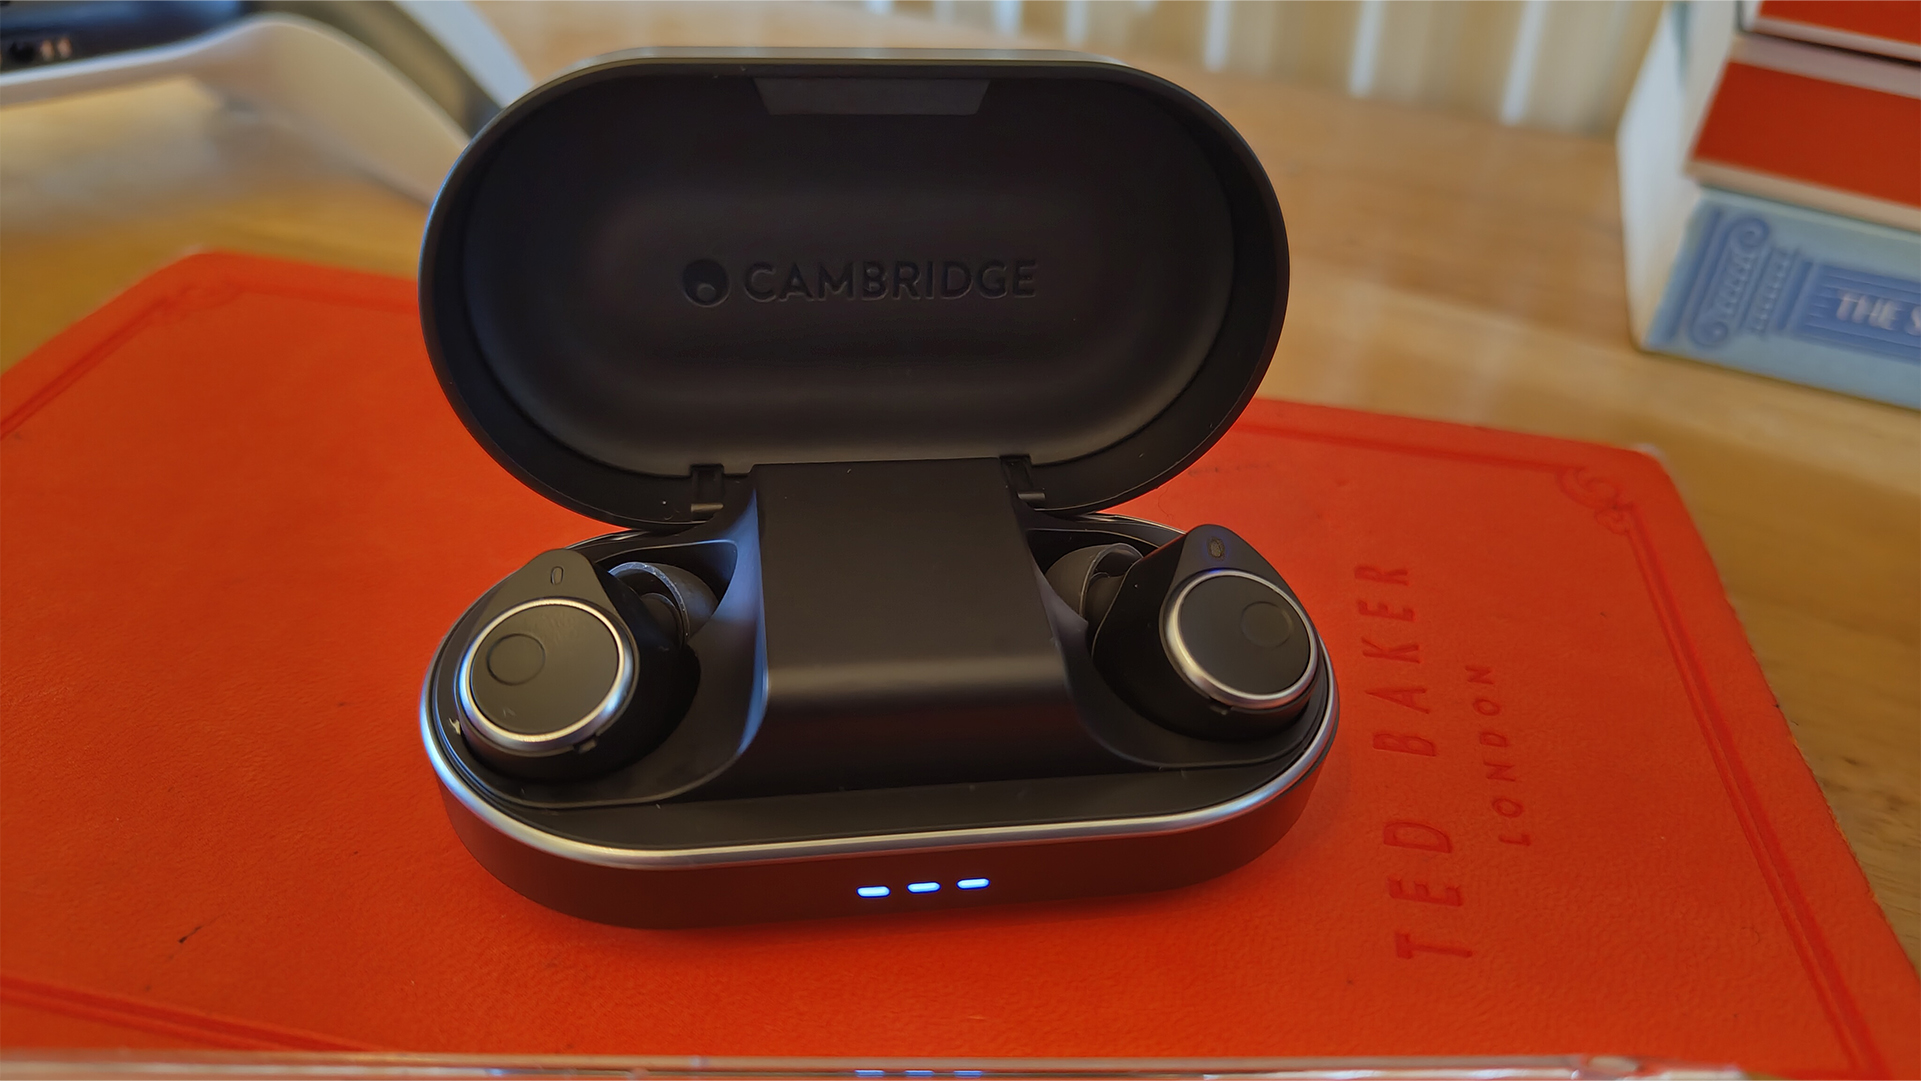 Cambridge Audio Melomania M100 wireless earbuds in case on red surface